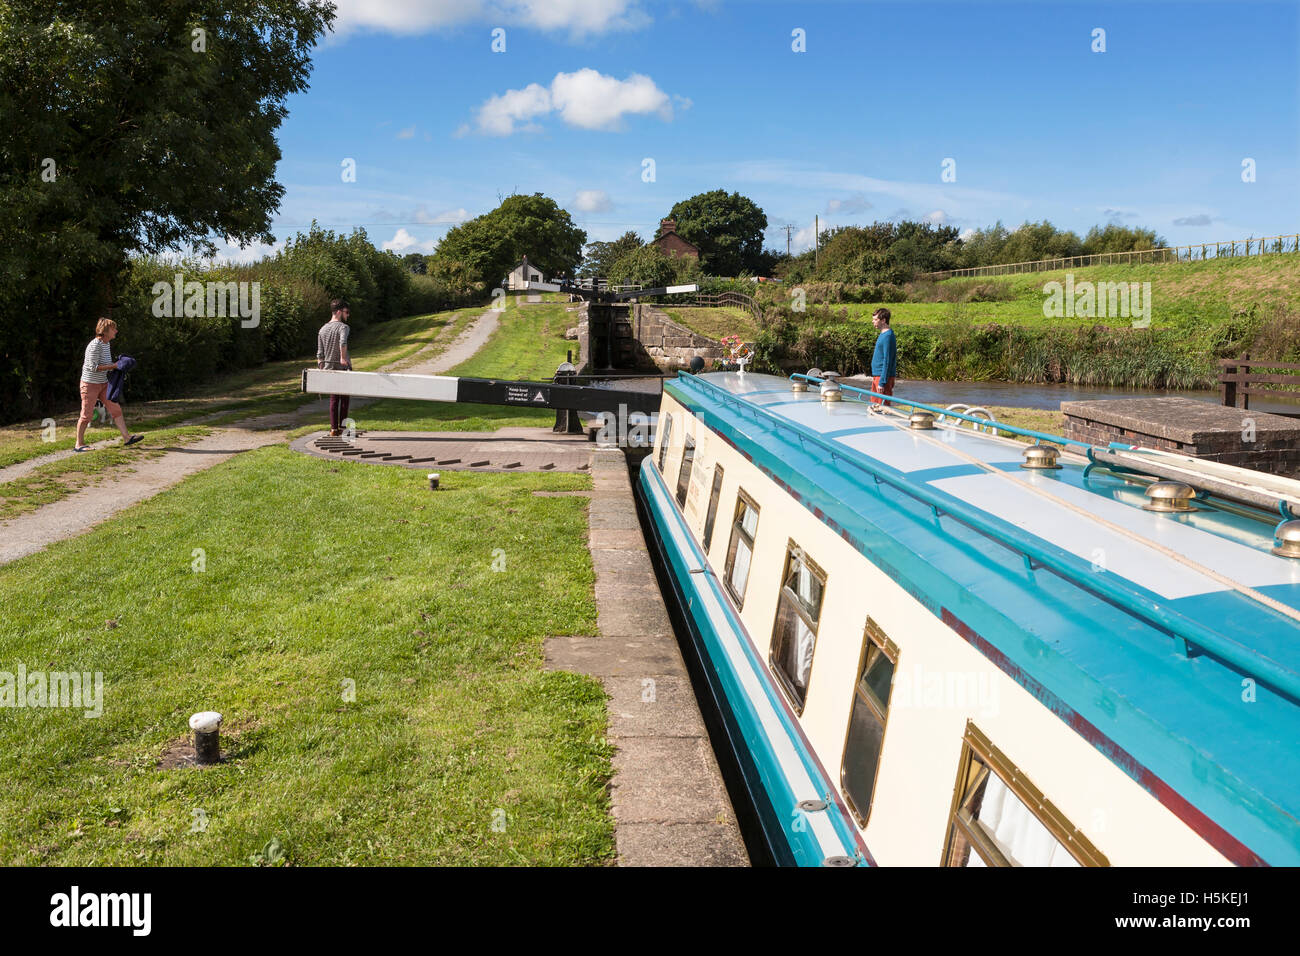 Narrowboat 'Misty Dawn' in Hurleston Lock No 2 on the Llangollen Canal, Cheshire, England MODEL RELEASED Stock Photo